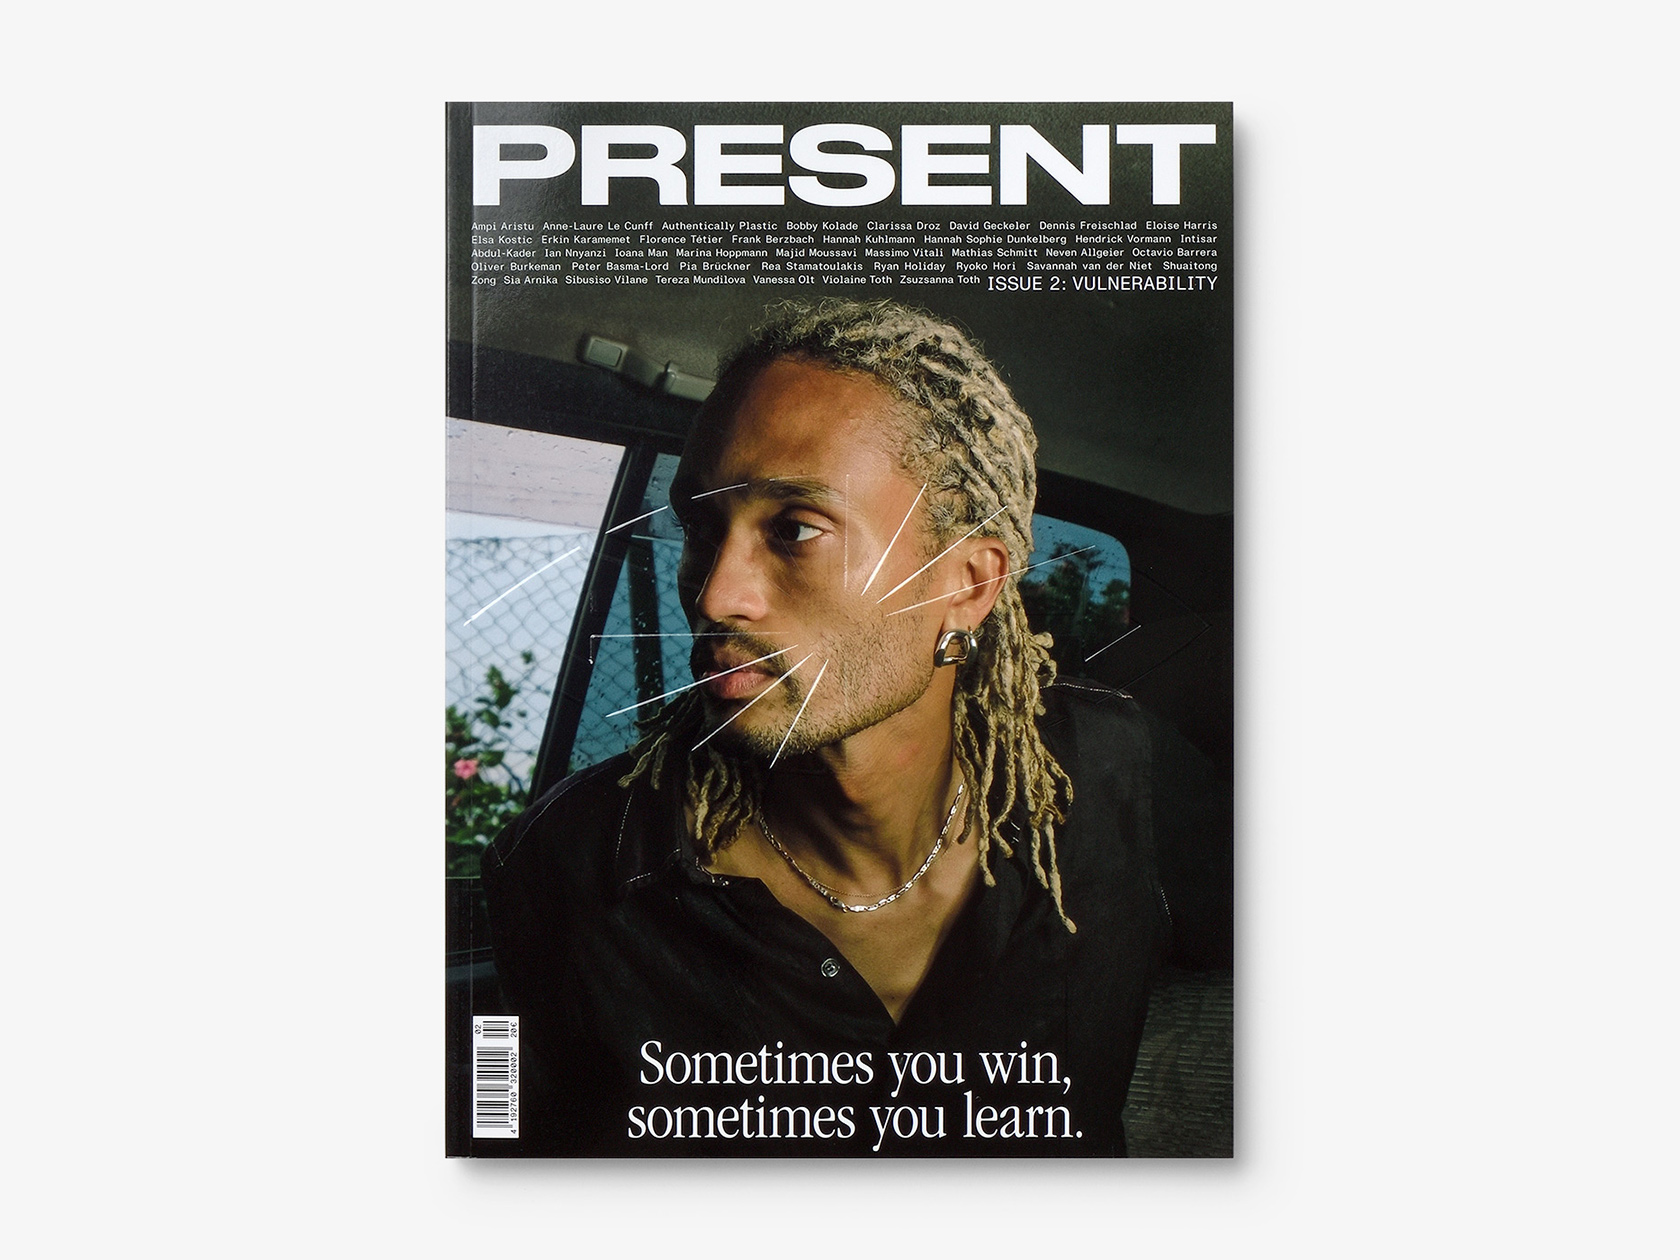 Take a dive into the second issue of PRESENT which explores the role of vulnerability in creative processes